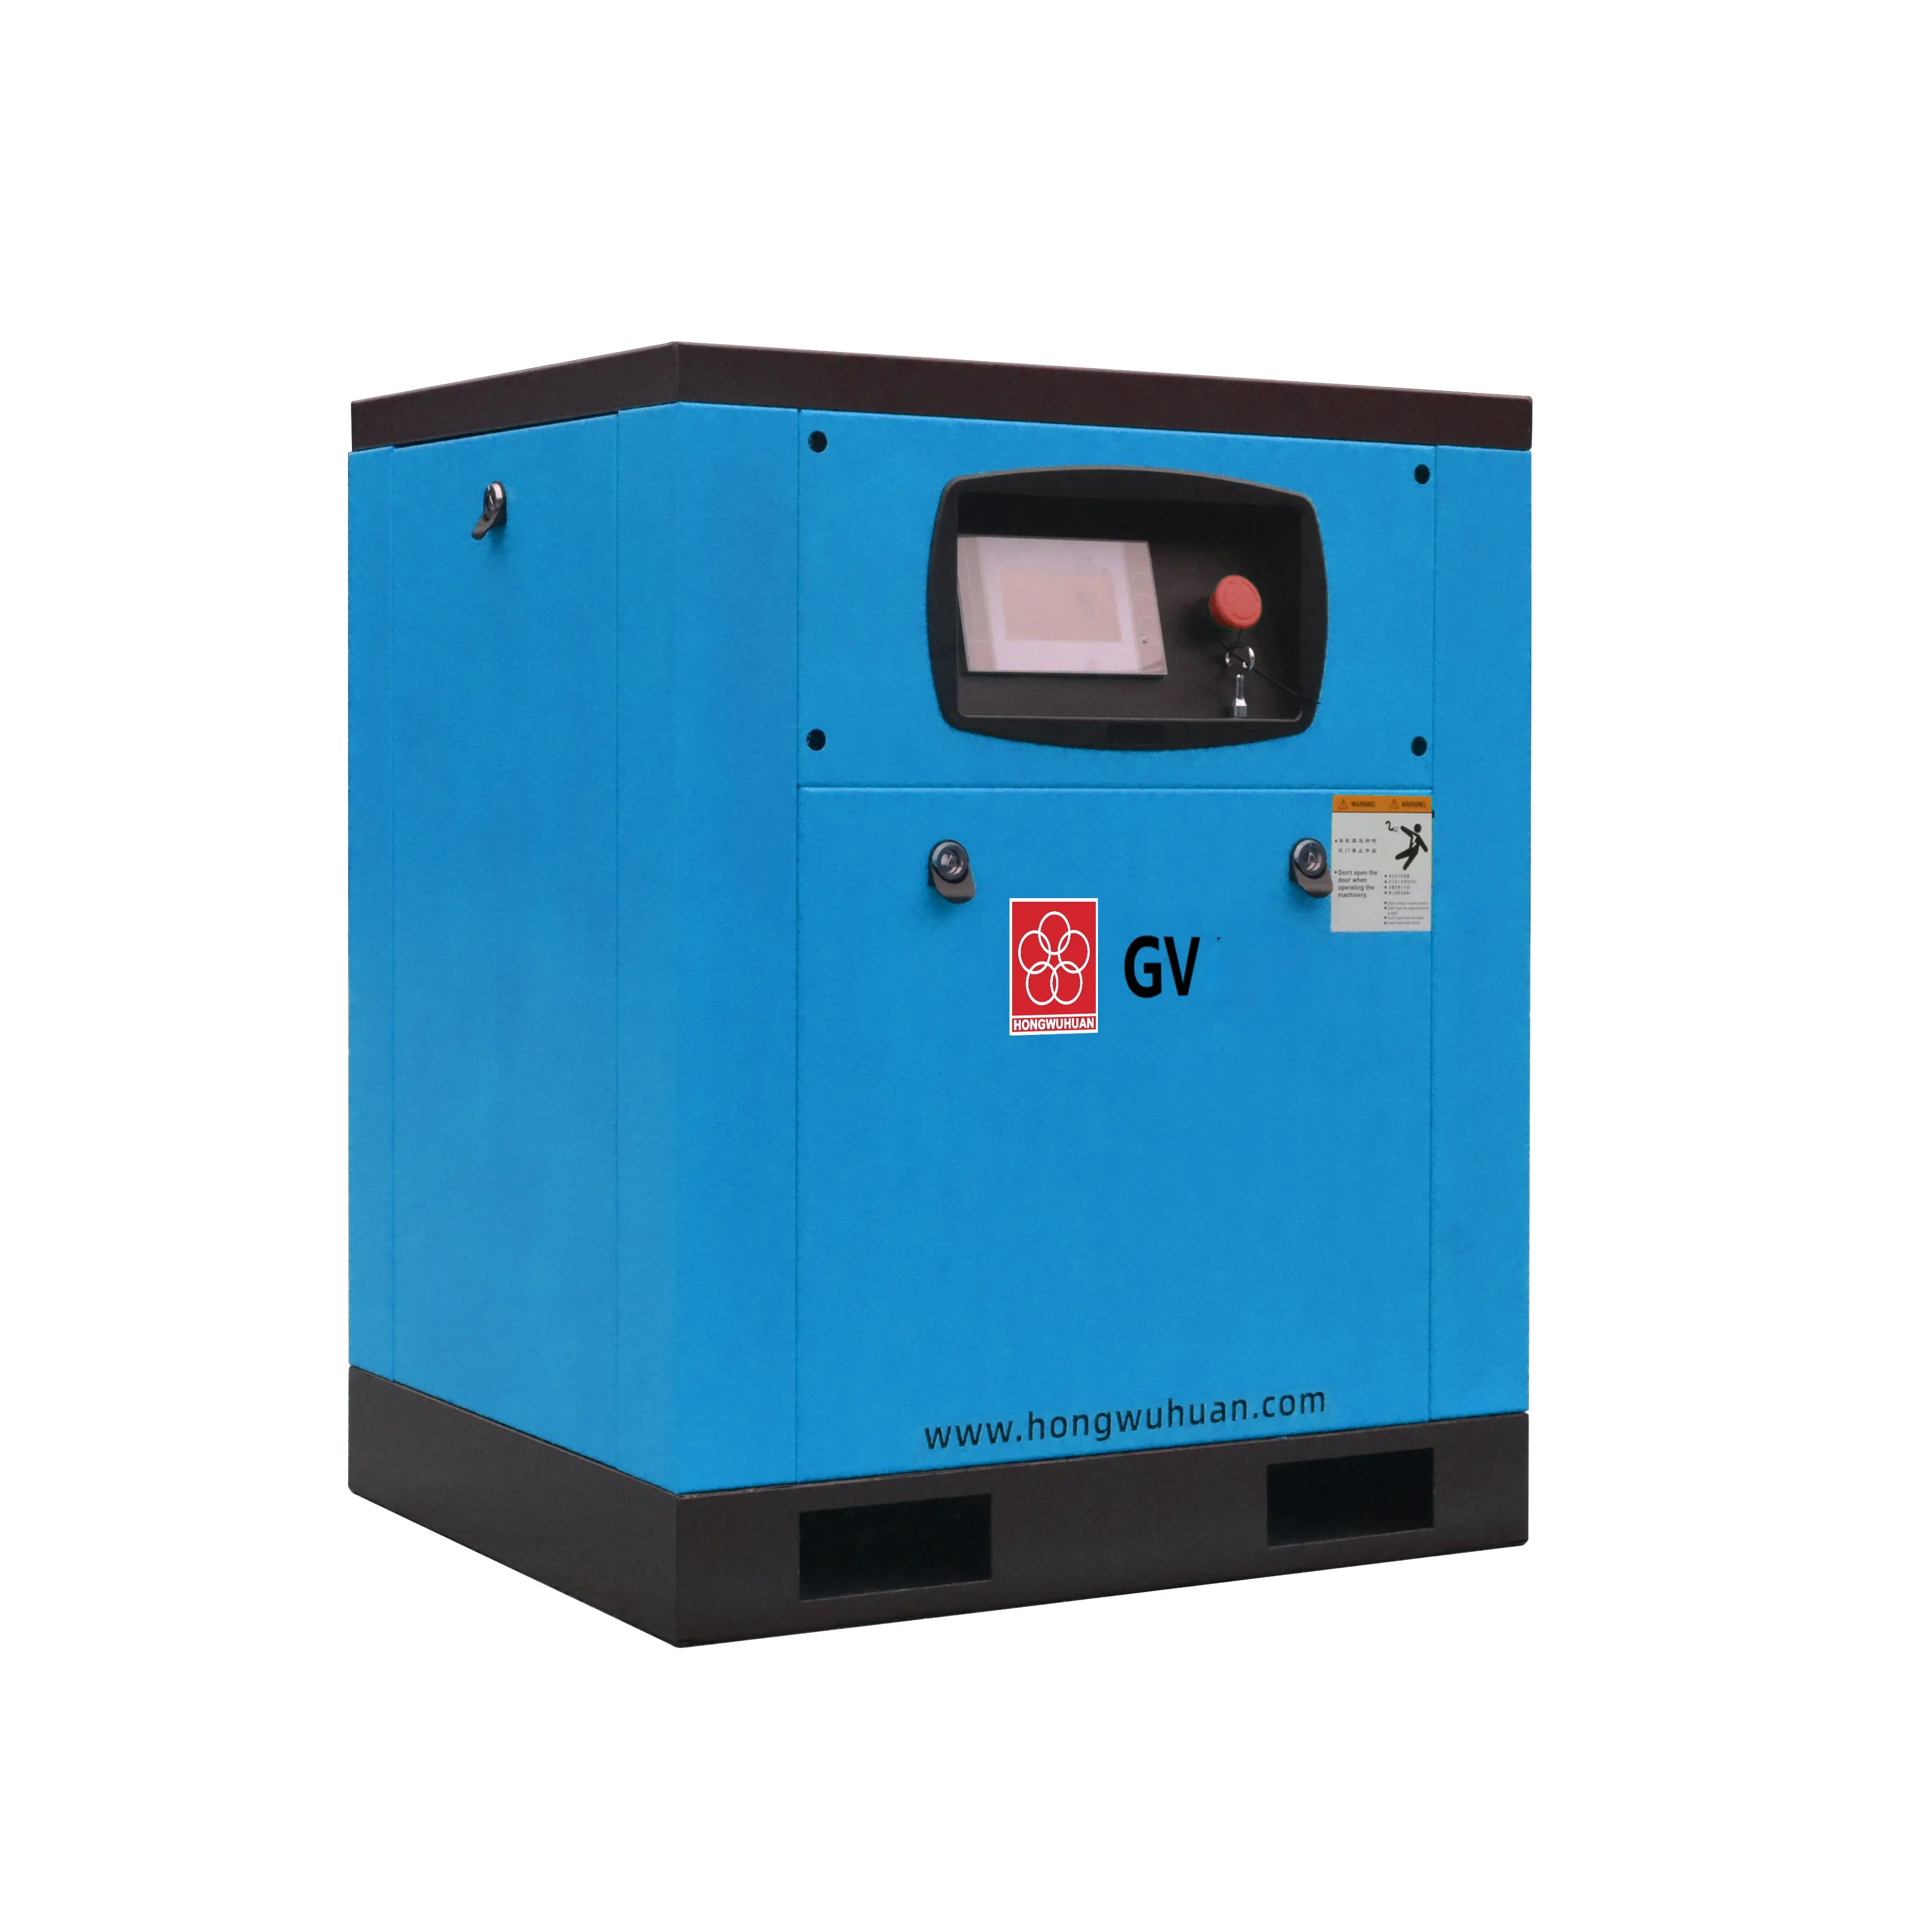 Hongwuhuan GV22M 22kw Station Type Screw Air Compressor New Equipped Frequency Converter Motor Permanent Magnet Frequency